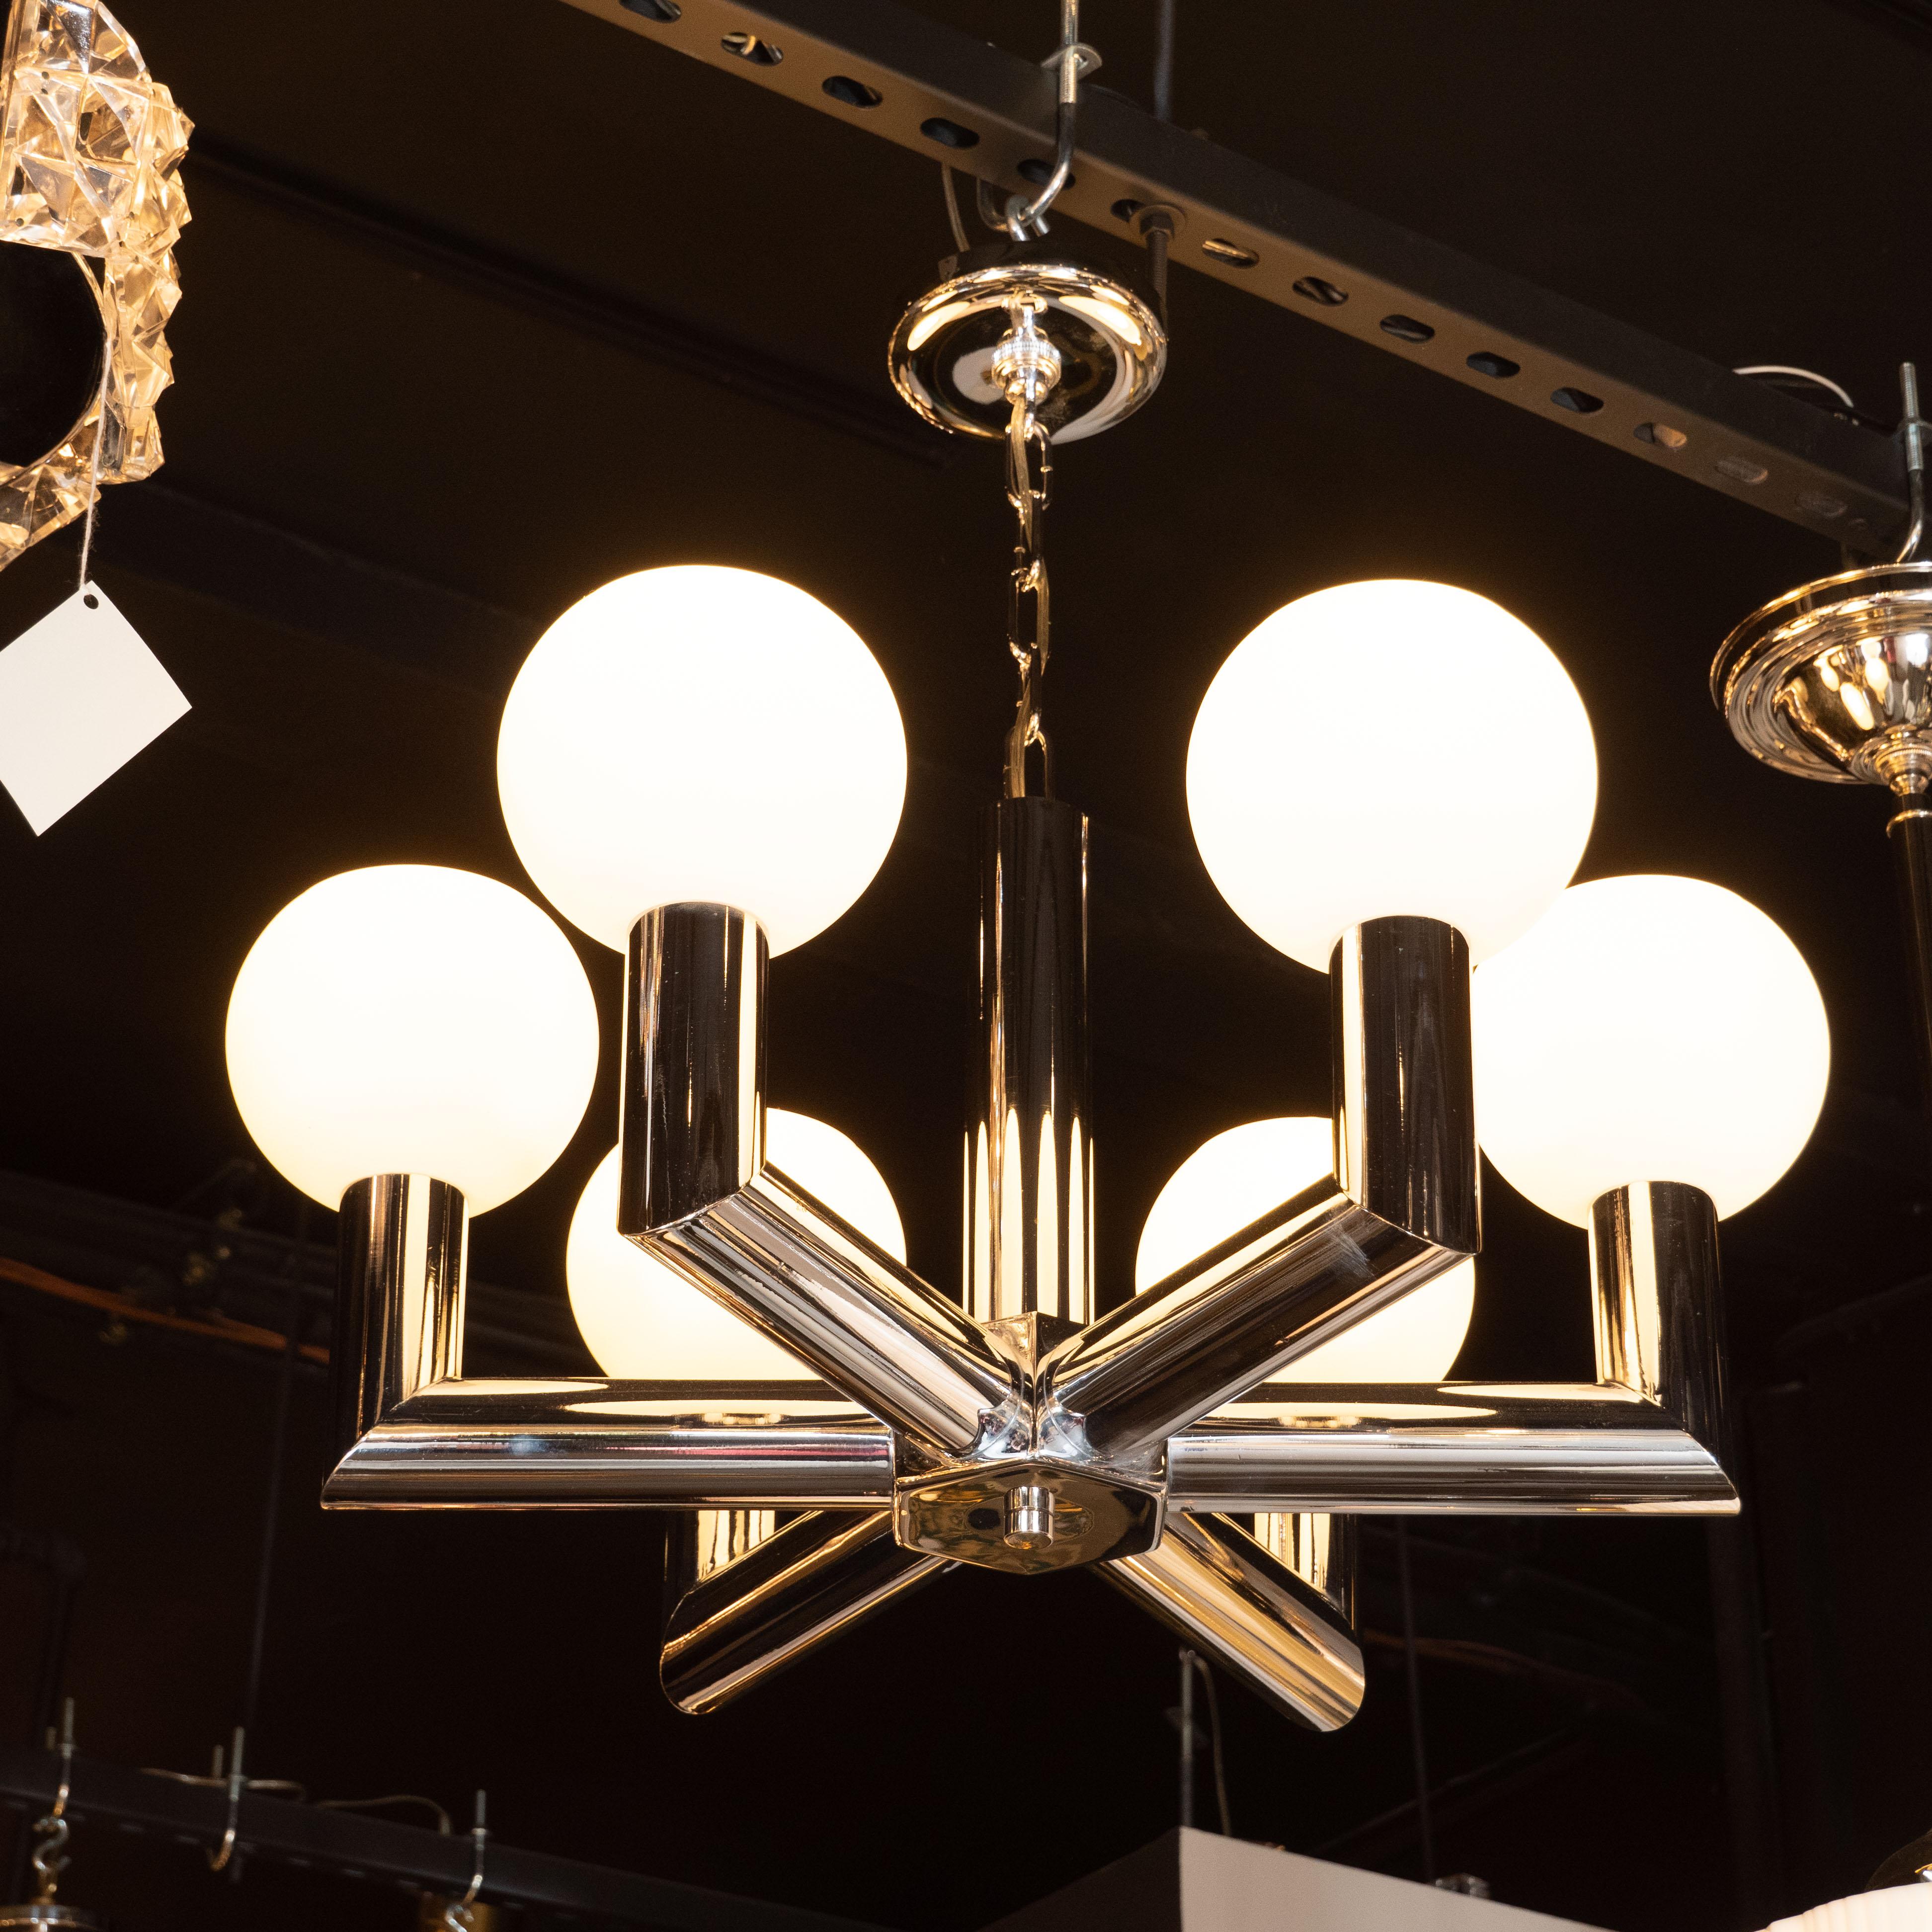 This refined Mid-Century Modern chandelier was realized by the esteemed Italian maker, Sciolari, in Italy, circa 1970. It features six cylindrical arms that extend outwards from a central hexagonal body before ascending upwards at right angles. The